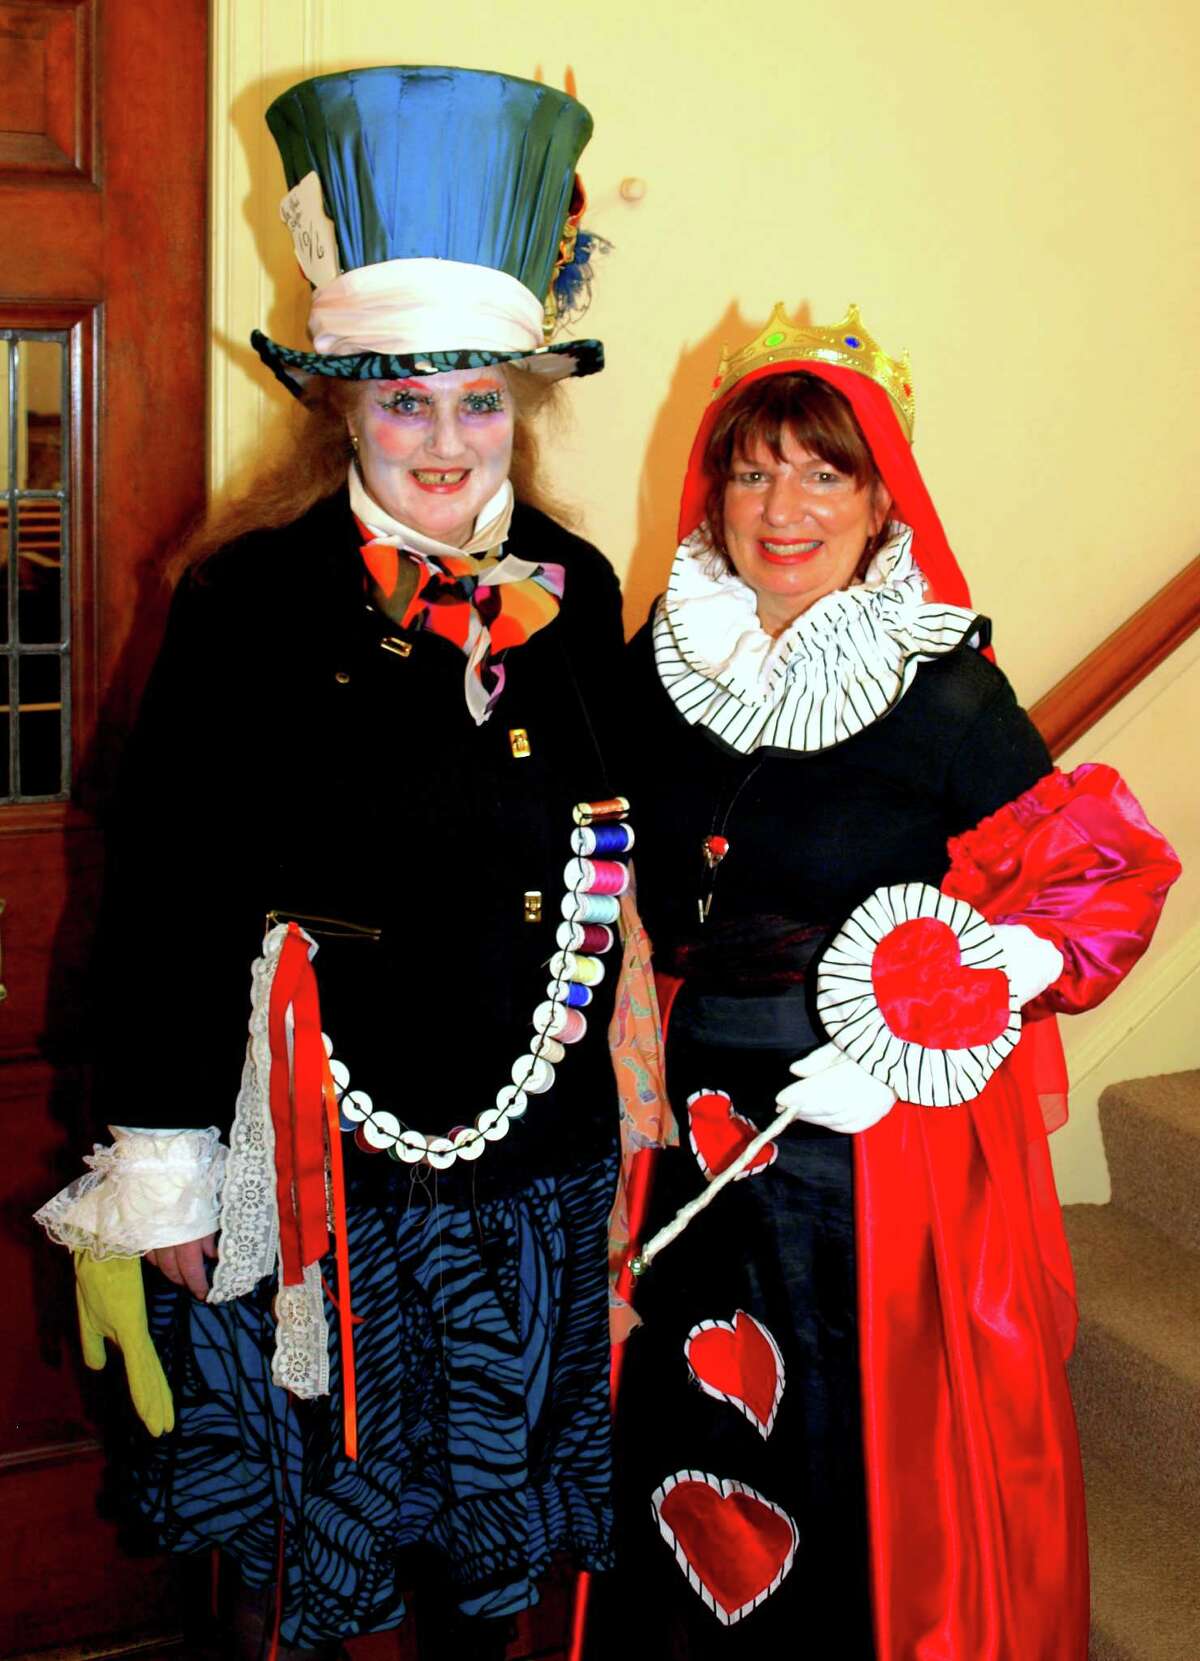 Elaborate costumes will be a feature of the 11th annual "Pipescreams" Halloween Musical Extravaganza Concert Sunday, Oct. 21, in Bridgeport. Shown at last year's event are, from left, Mimi Eppig and Cathy Tuttle, both of Trumbull.